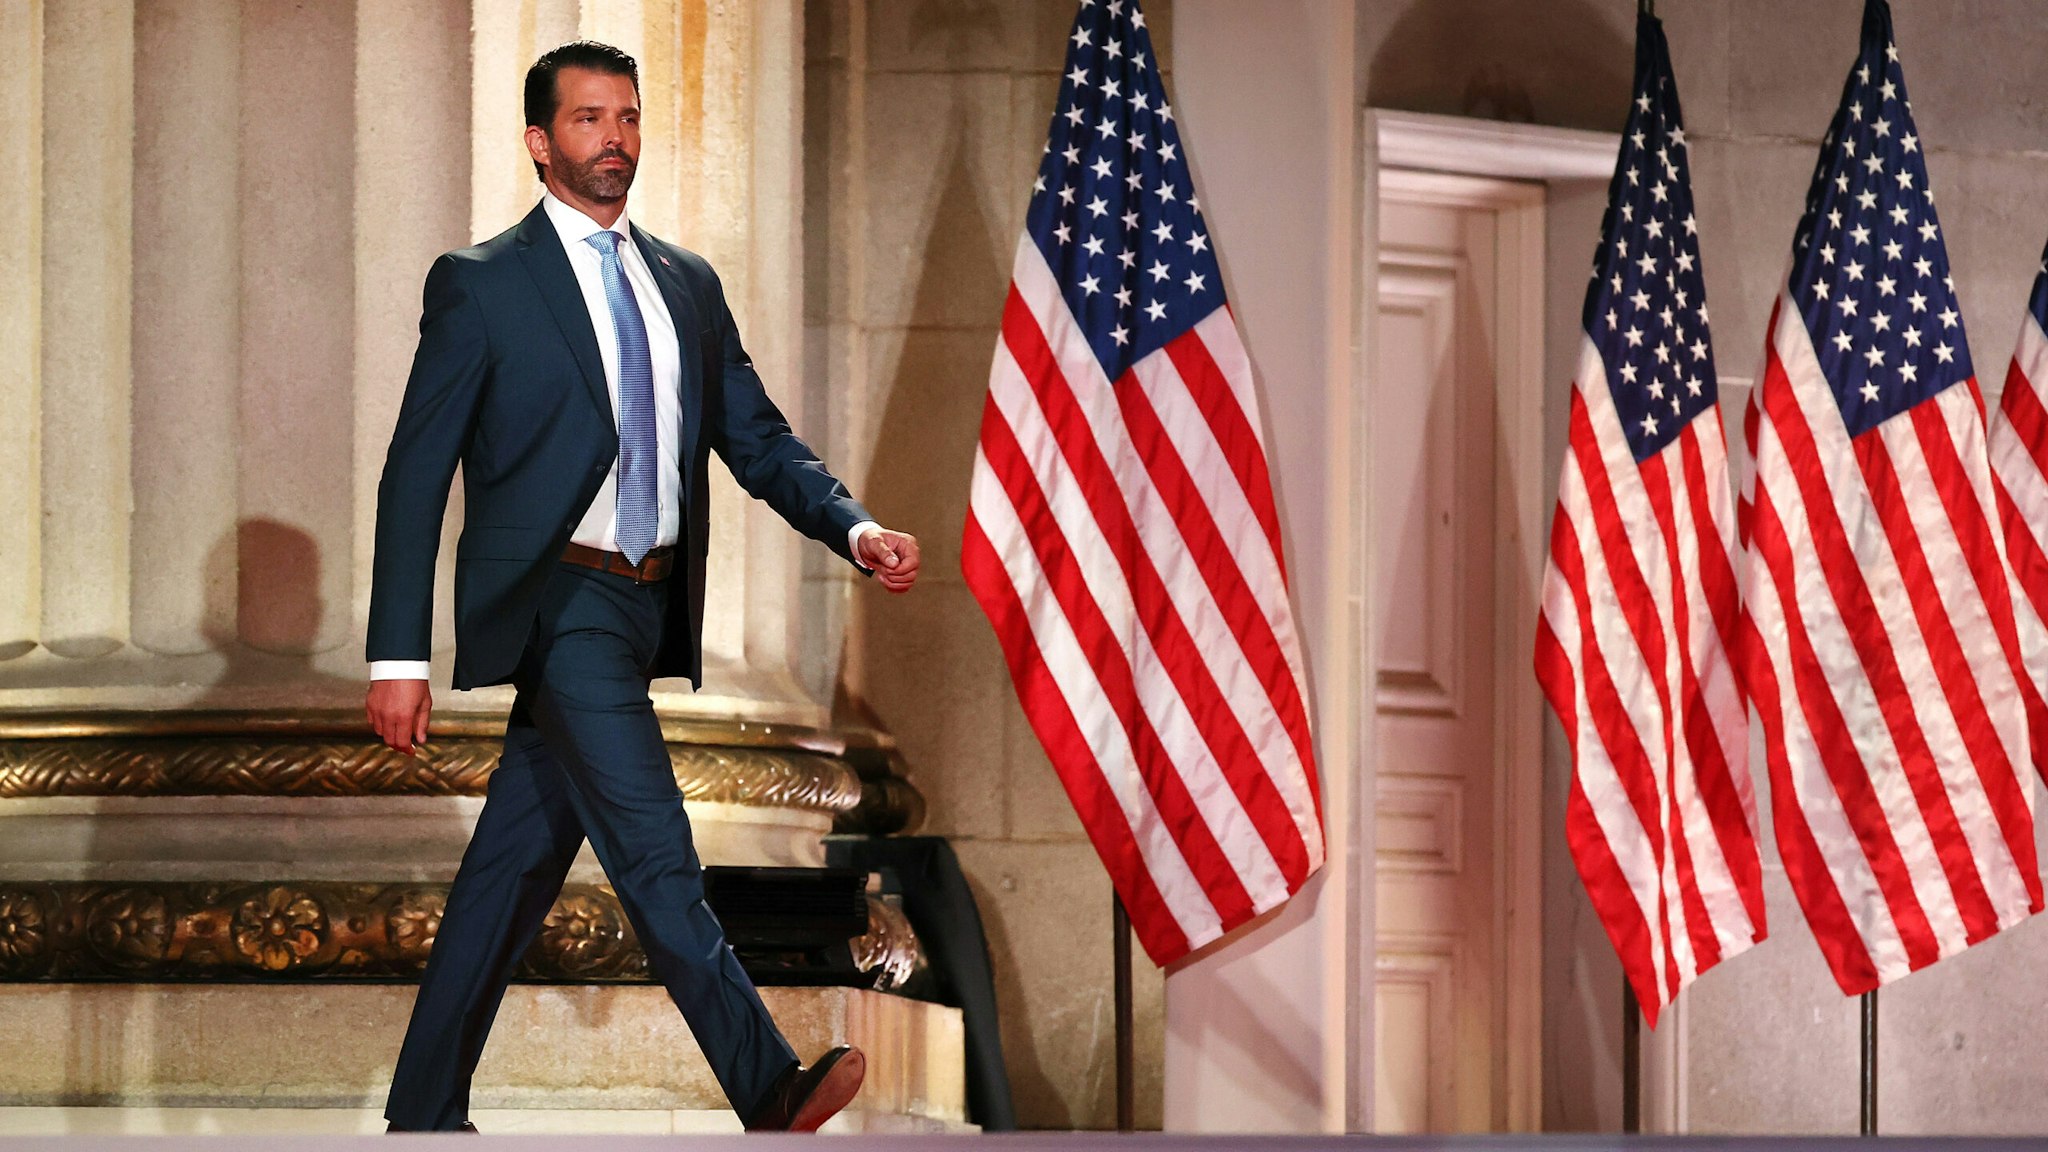 WASHINGTON, DC - AUGUST 24: Donald Trump Jr. steps out on stage before pre-recording his address to the Republican National Convention at the Mellon Auditorium on August 24, 2020 in Washington, DC. The novel coronavirus pandemic has forced the Republican Party to move away from an in-person convention to a televised format, similar to the Democratic Party's convention a week earlier.